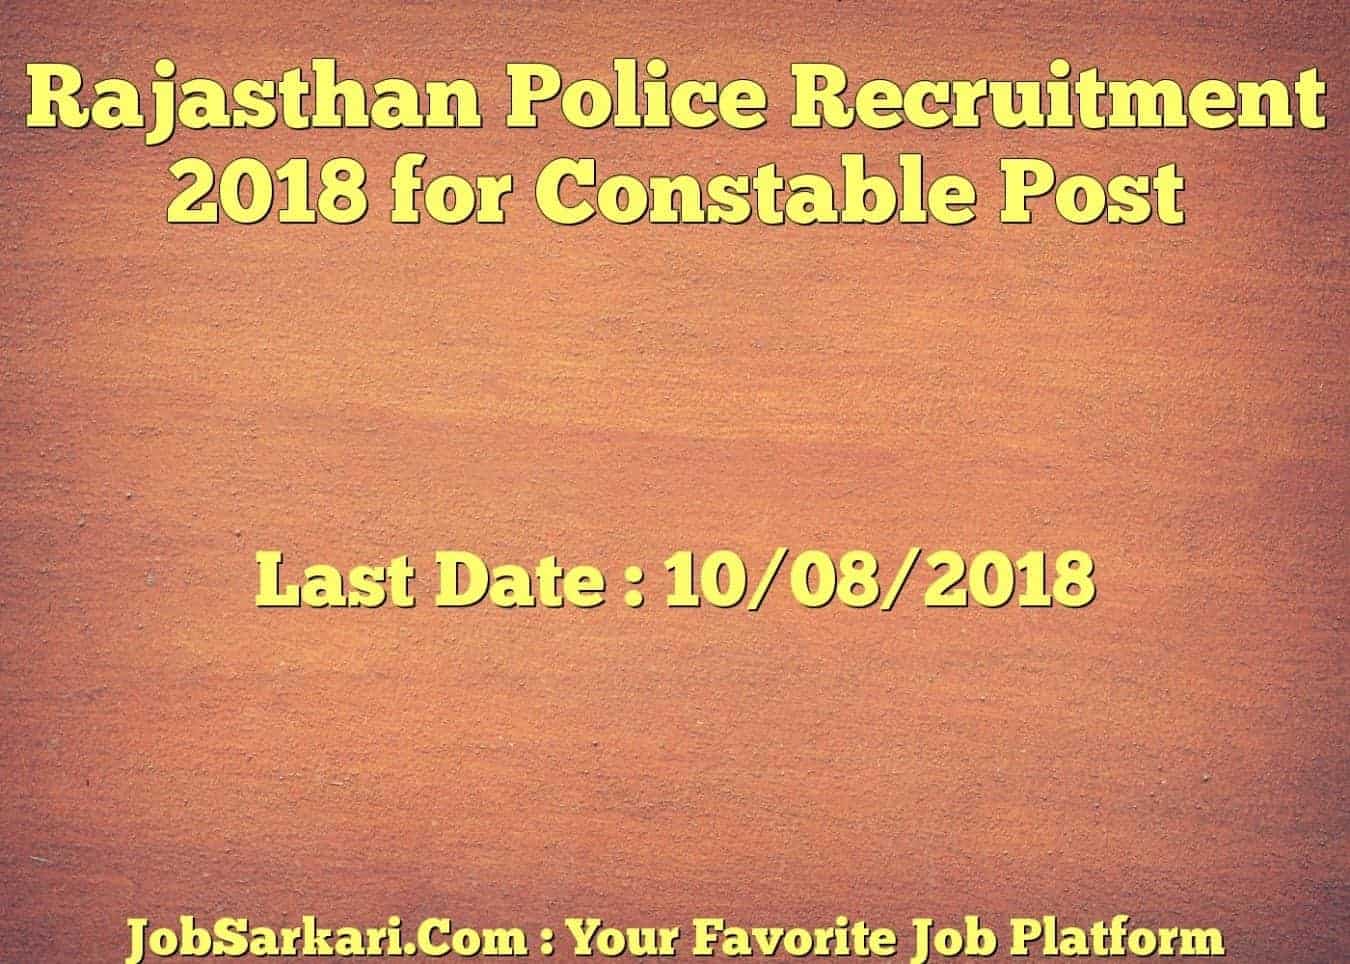 Rajasthan Police Recruitment 2018 for Constable Post